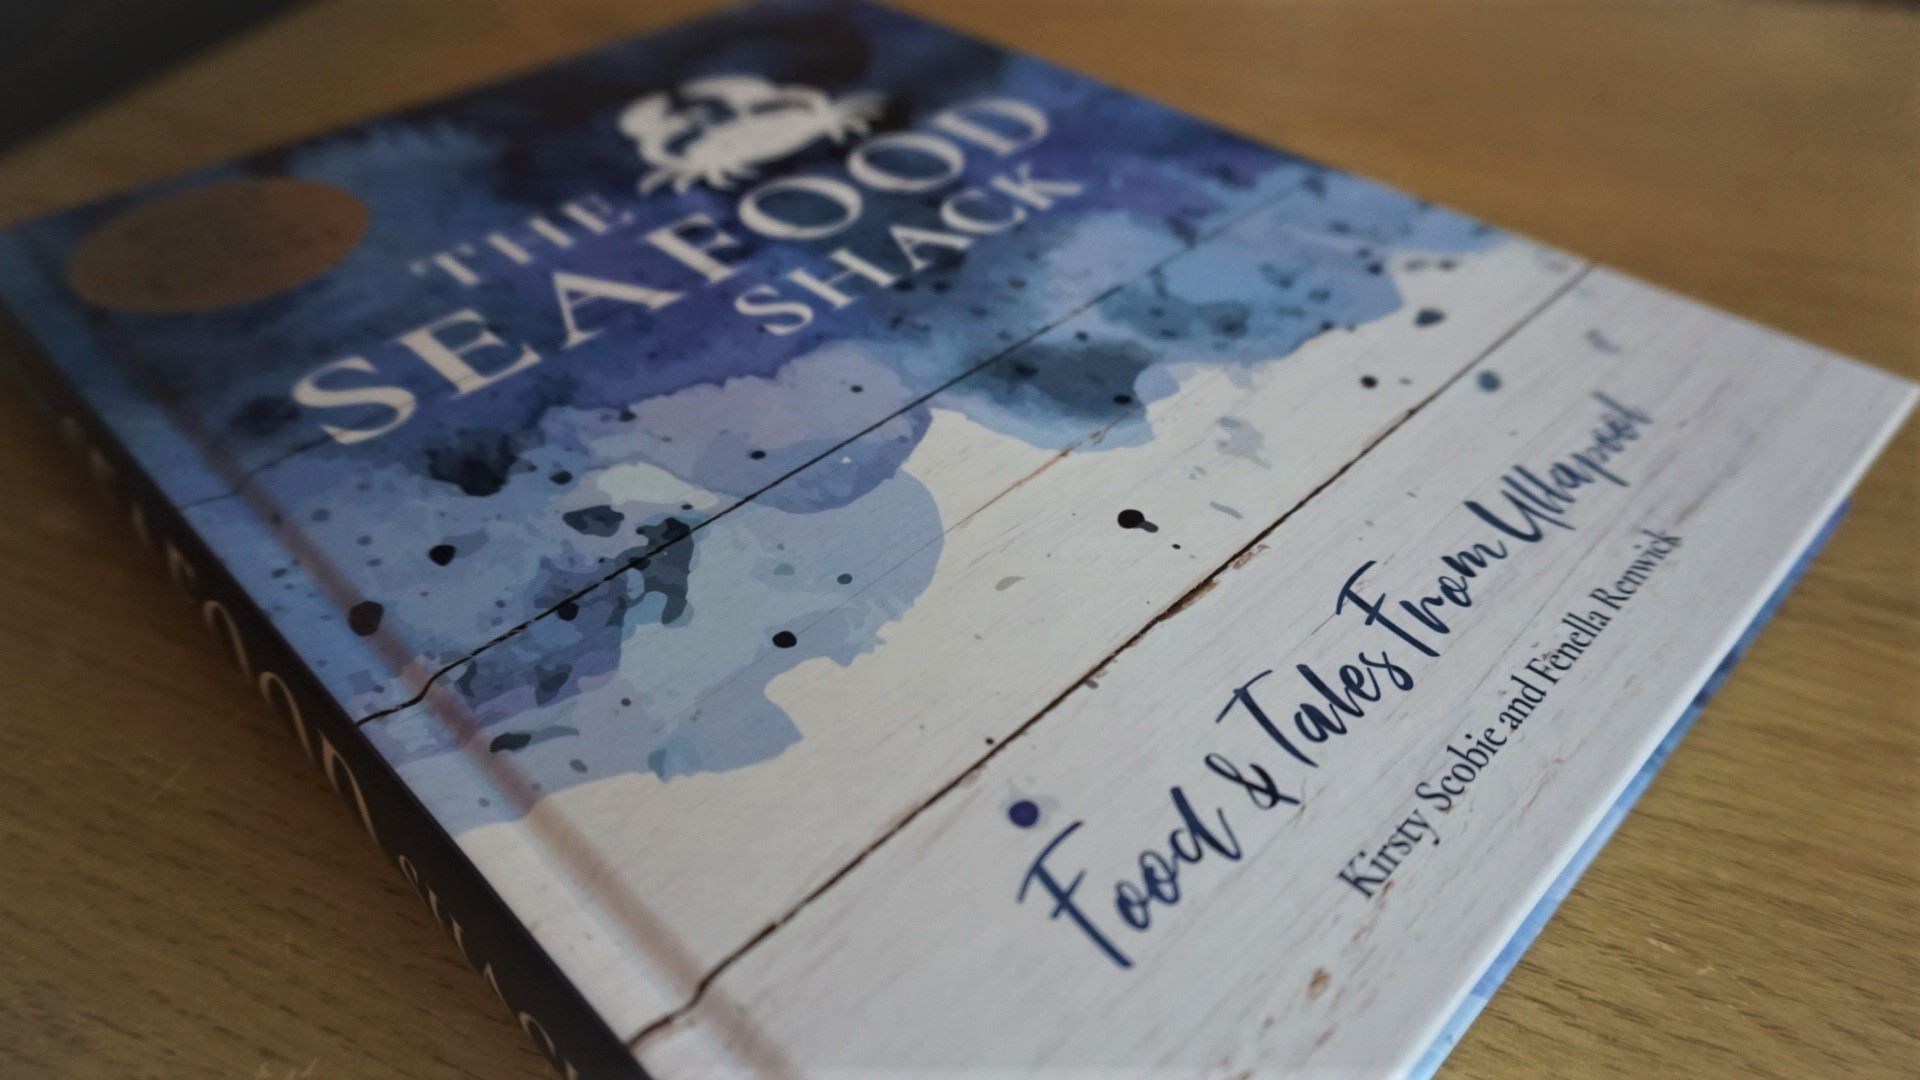 The Seafood Shack book, first released at the end of 2020, won at the National Geographic Traveller Reader Awards 2021 in the Food and Travel category.